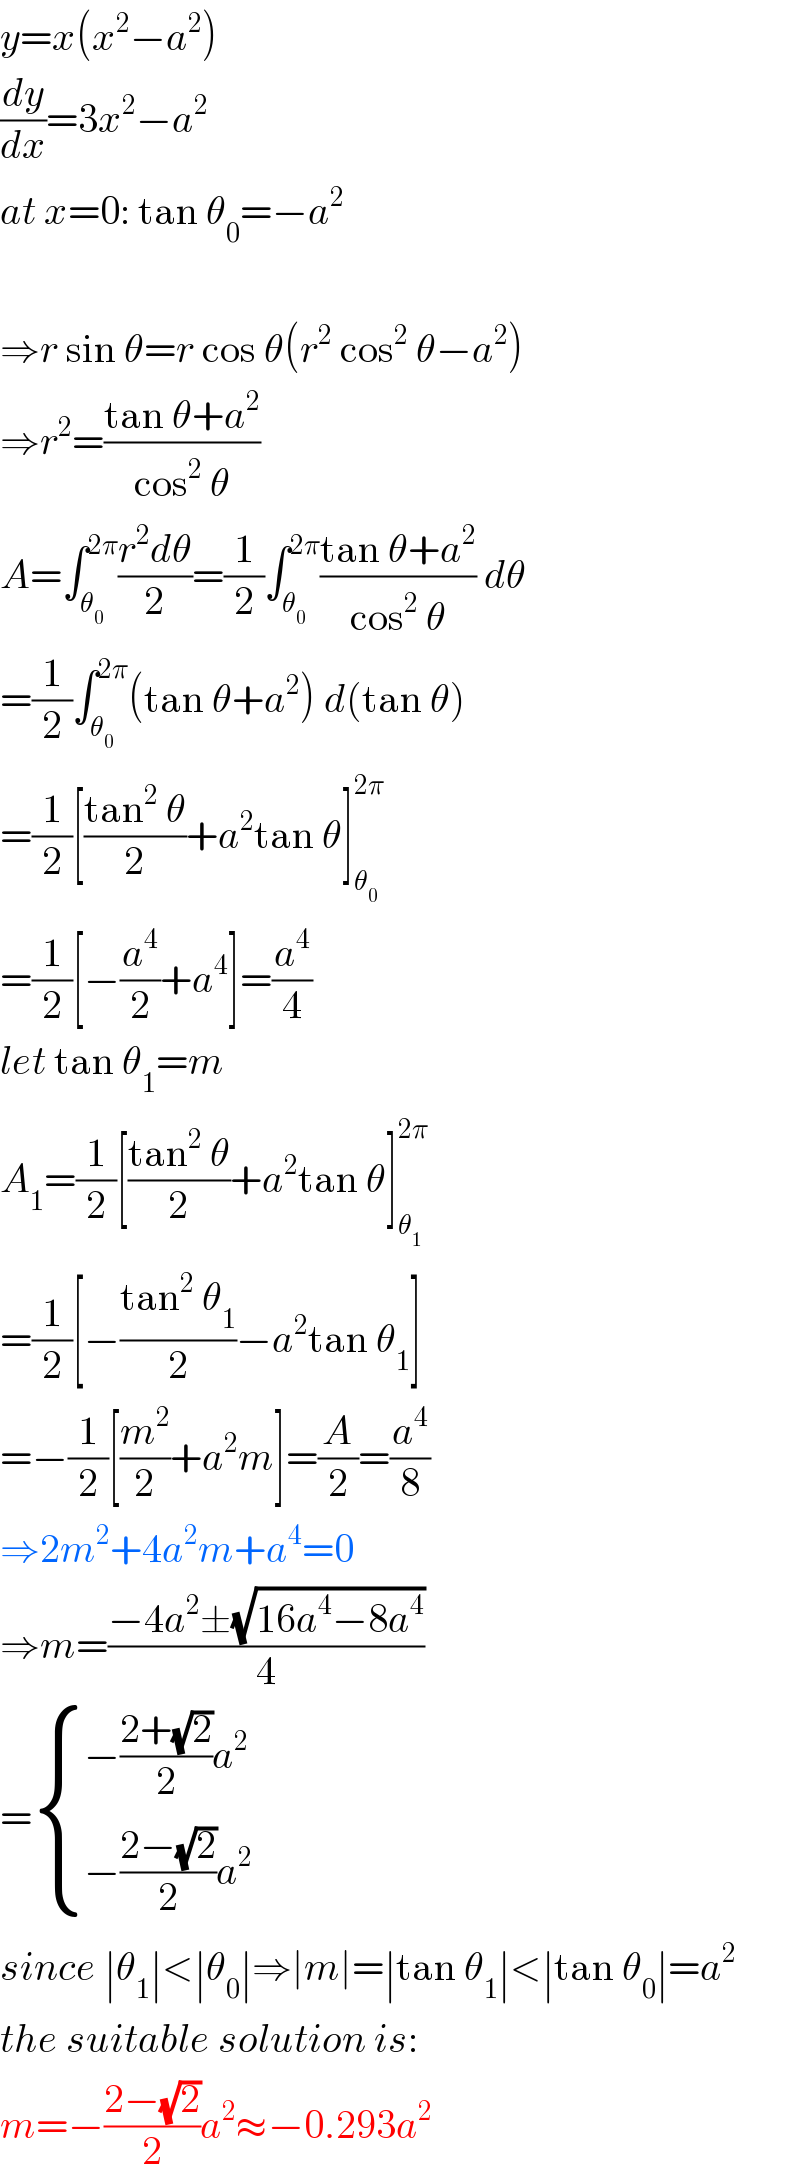 y=x(x^2 −a^2 )  (dy/dx)=3x^2 −a^2   at x=0: tan θ_0 =−a^2     ⇒r sin θ=r cos θ(r^2  cos^2  θ−a^2 )  ⇒r^2 =((tan θ+a^2 )/(cos^2  θ))  A=∫_θ_0  ^(2π) ((r^2 dθ)/2)=(1/2)∫_θ_0  ^(2π) ((tan θ+a^2 )/(cos^2  θ)) dθ  =(1/2)∫_θ_0  ^(2π) (tan θ+a^2 ) d(tan θ)  =(1/2)[((tan^2  θ)/2)+a^2 tan θ]_θ_0  ^(2π)   =(1/2)[−(a^4 /2)+a^4 ]=(a^4 /4)  let tan θ_1 =m  A_1 =(1/2)[((tan^2  θ)/2)+a^2 tan θ]_θ_1  ^(2π)   =(1/2)[−((tan^2  θ_1 )/2)−a^2 tan θ_1 ]  =−(1/2)[(m^2 /2)+a^2 m]=(A/2)=(a^4 /8)  ⇒2m^2 +4a^2 m+a^4 =0  ⇒m=((−4a^2 ±(√(16a^4 −8a^4 )))/4)  = { ((−((2+(√2))/2)a^2 )),((−((2−(√2))/2)a^2 )) :}  since ∣θ_1 ∣<∣θ_0 ∣⇒∣m∣=∣tan θ_1 ∣<∣tan θ_0 ∣=a^2   the suitable solution is:  m=−((2−(√2))/2)a^2 ≈−0.293a^2   